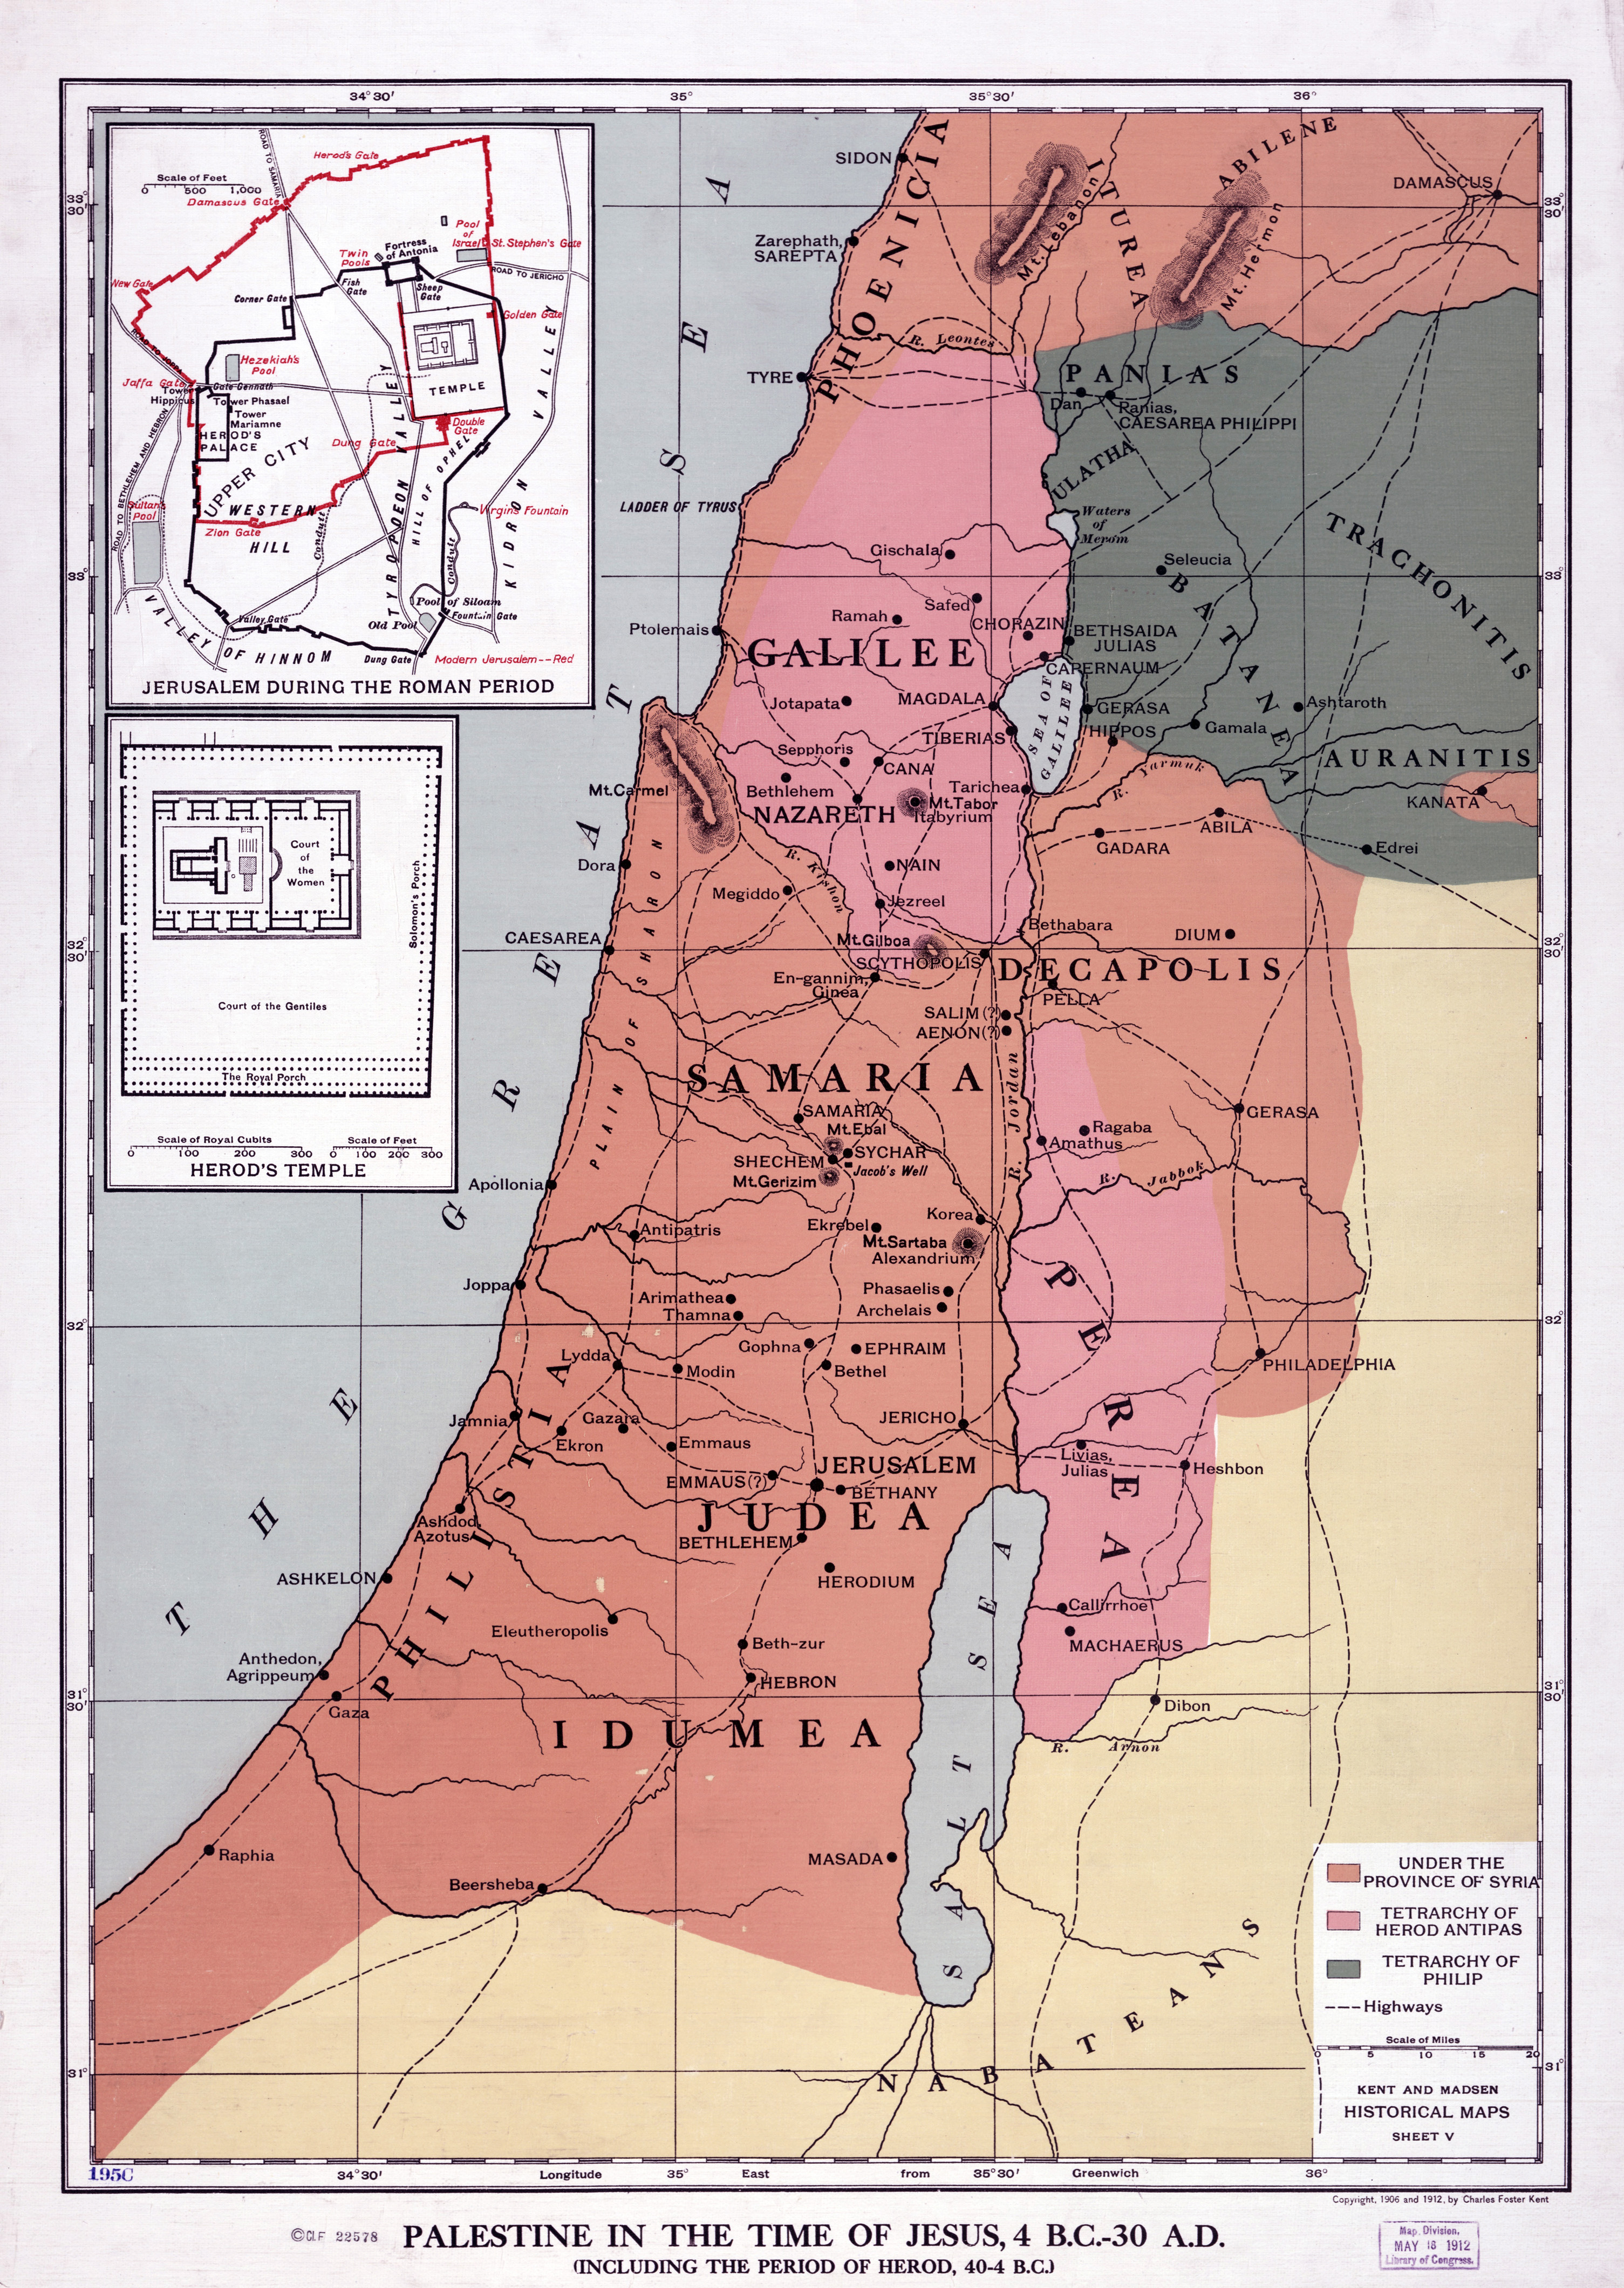 large-detailed-old-map-of-palestine-in-the-time-of-jesus-4-b-c-30-a